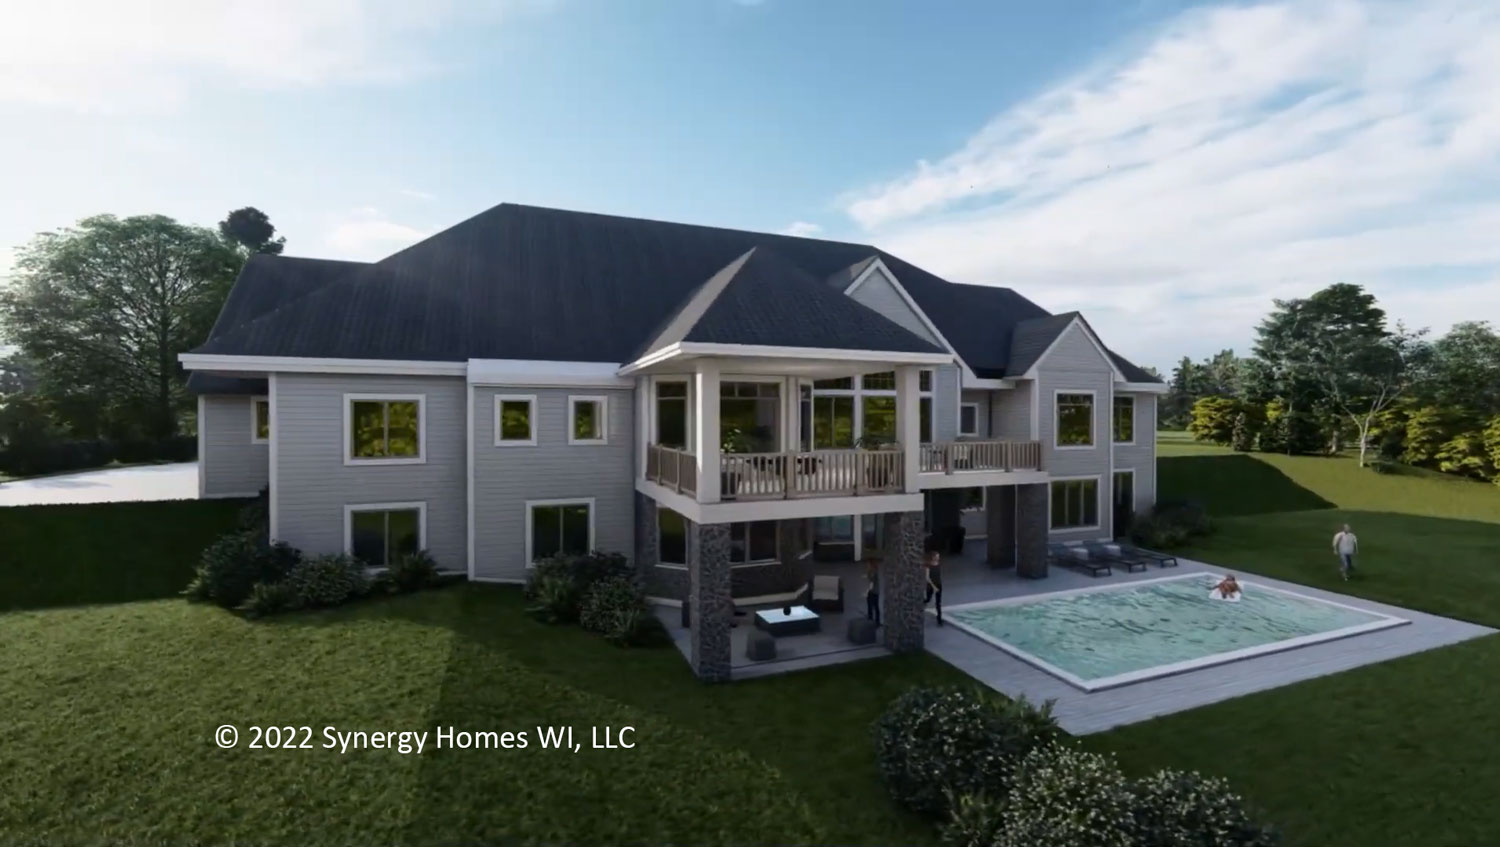 The Monet by Synergy Homes